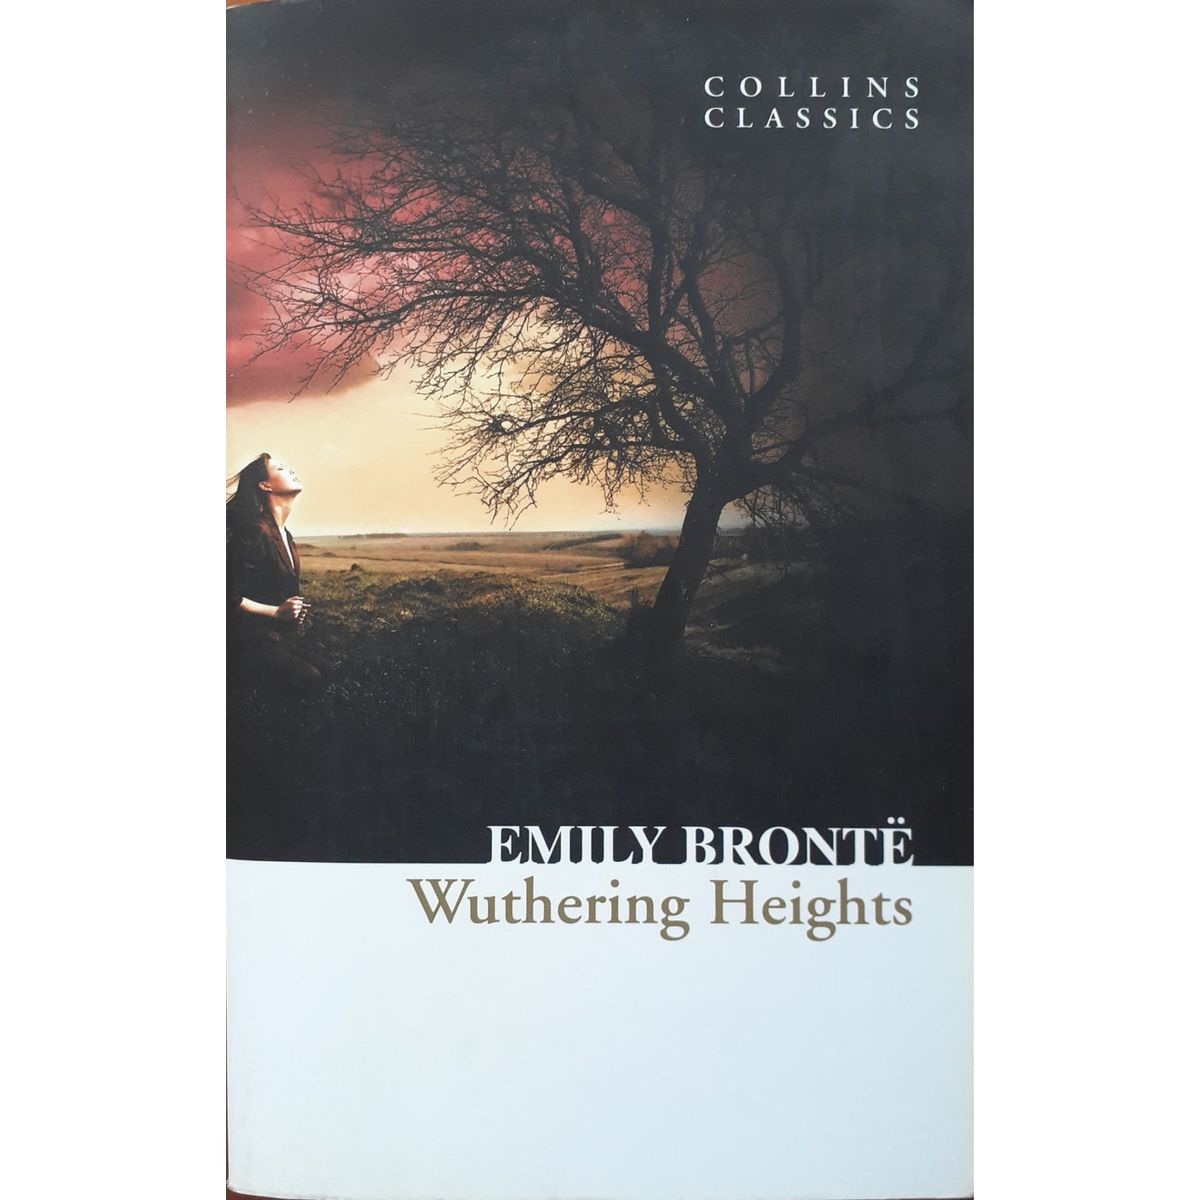 ISBN: 9780007350810 / 0007350813 - Wuthering Heights by Emily Brontë [2010]